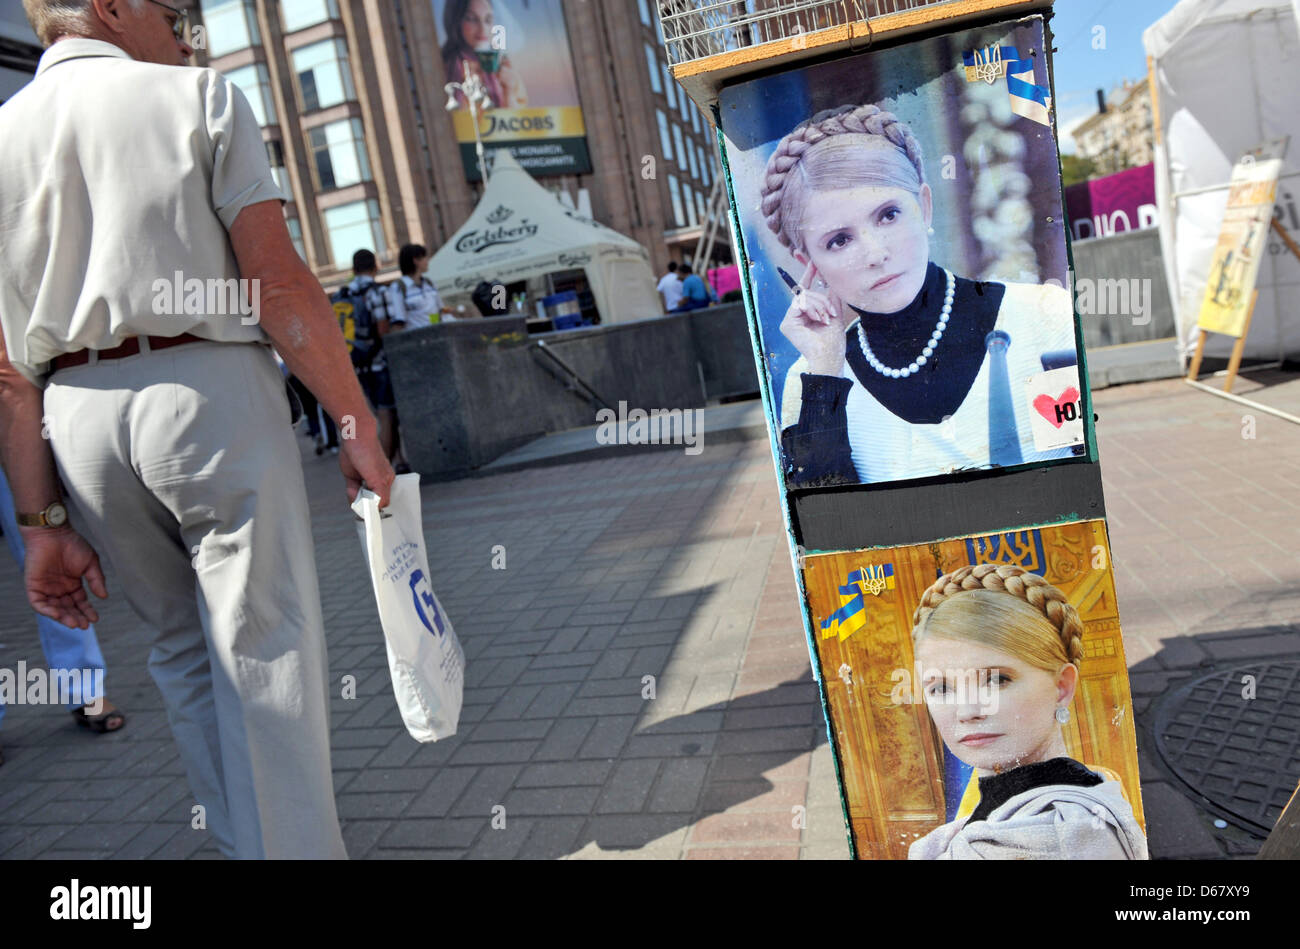 A man walks past photos of the Ukranian politician Yulia Tymoshenko in a protest camp in downtown Kiev, Ukraine, 30 June 2012. The Euro 2012 championships were discussed controversially over the case of Ukraine's jailed former Prime Minister Yulia Tymoshenko. Photo: ANDREAS GEBERT Stock Photo